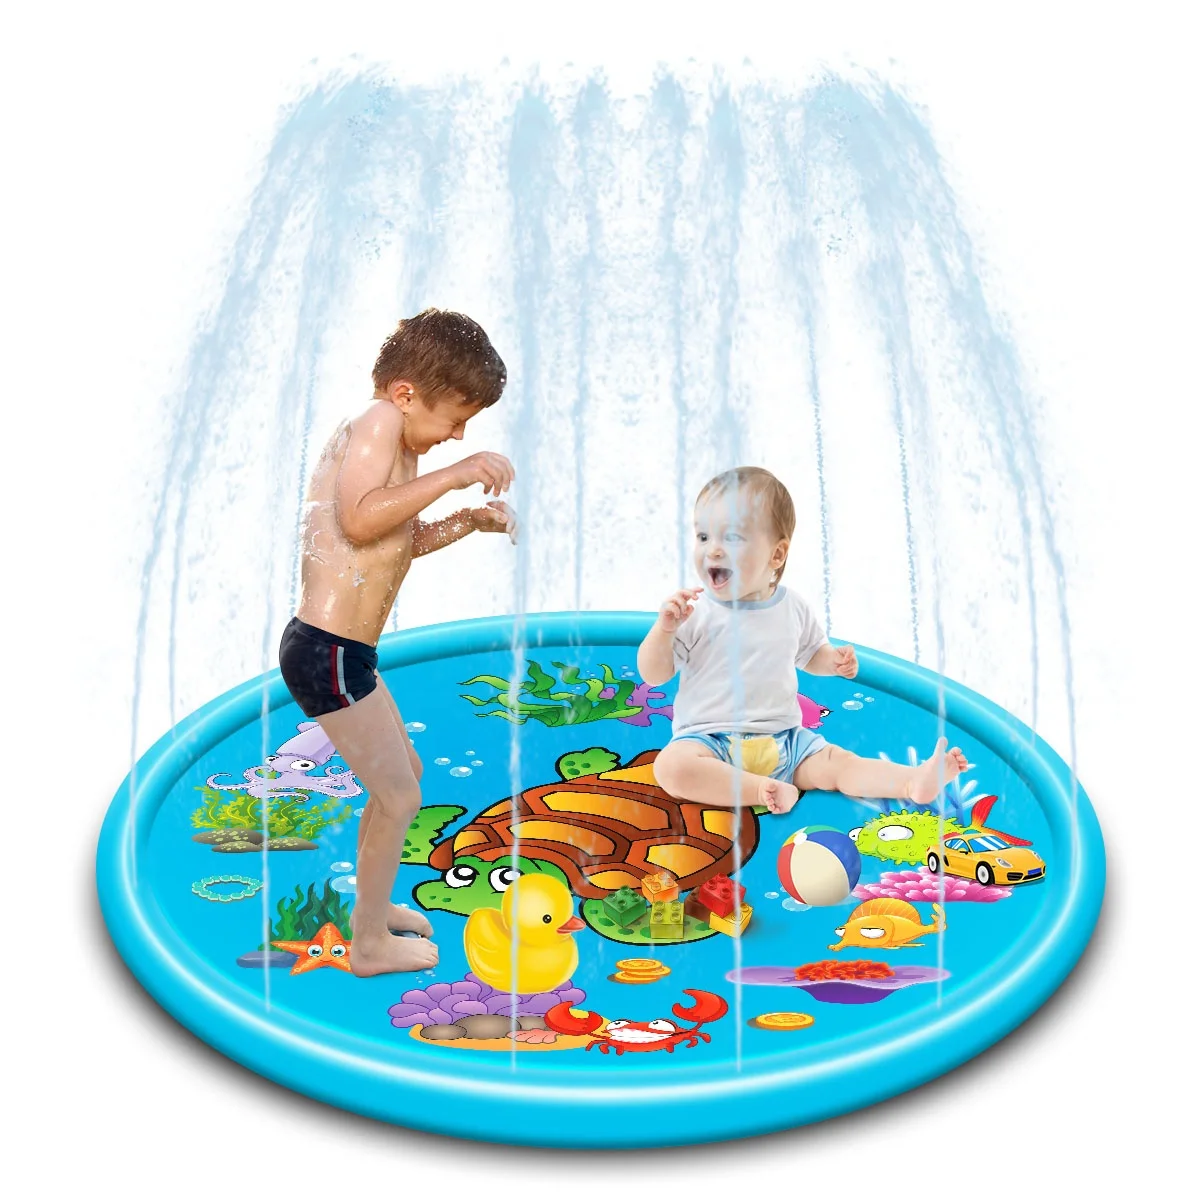 
110CM ECO friendly PVC Sprinkle Splash Play Mat Pad Inflatable Outdoor Water Spray Play Mat Toys for Kids Toddlers Summer Fun  (1600083873719)